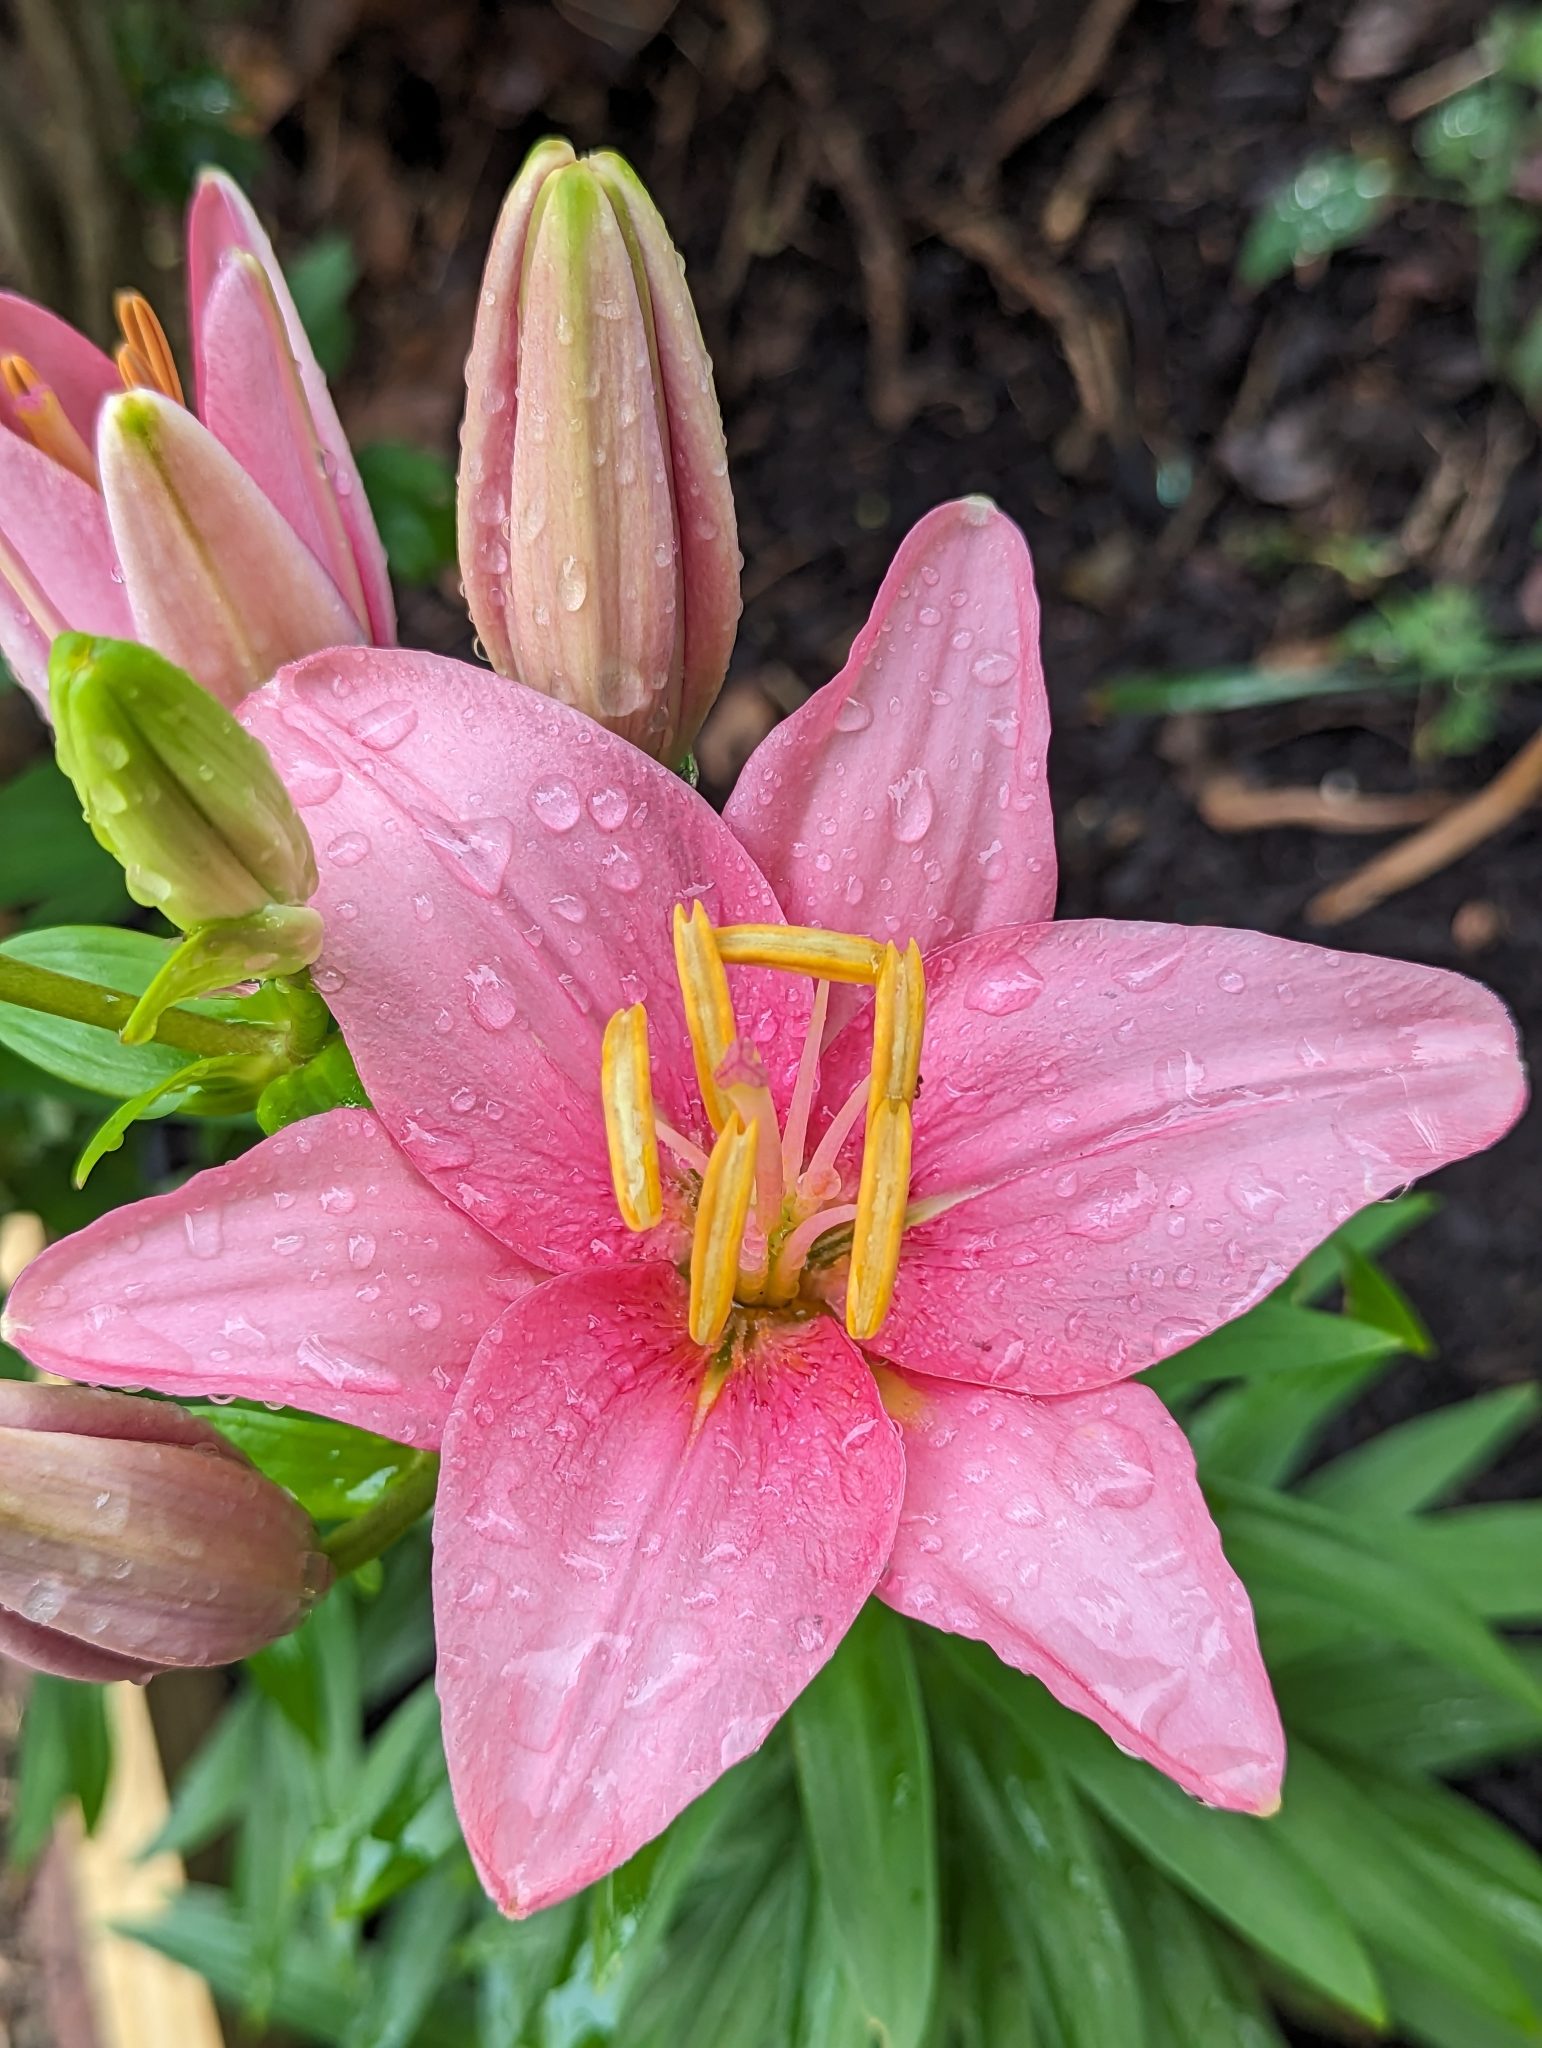 A big, pink wet Lily